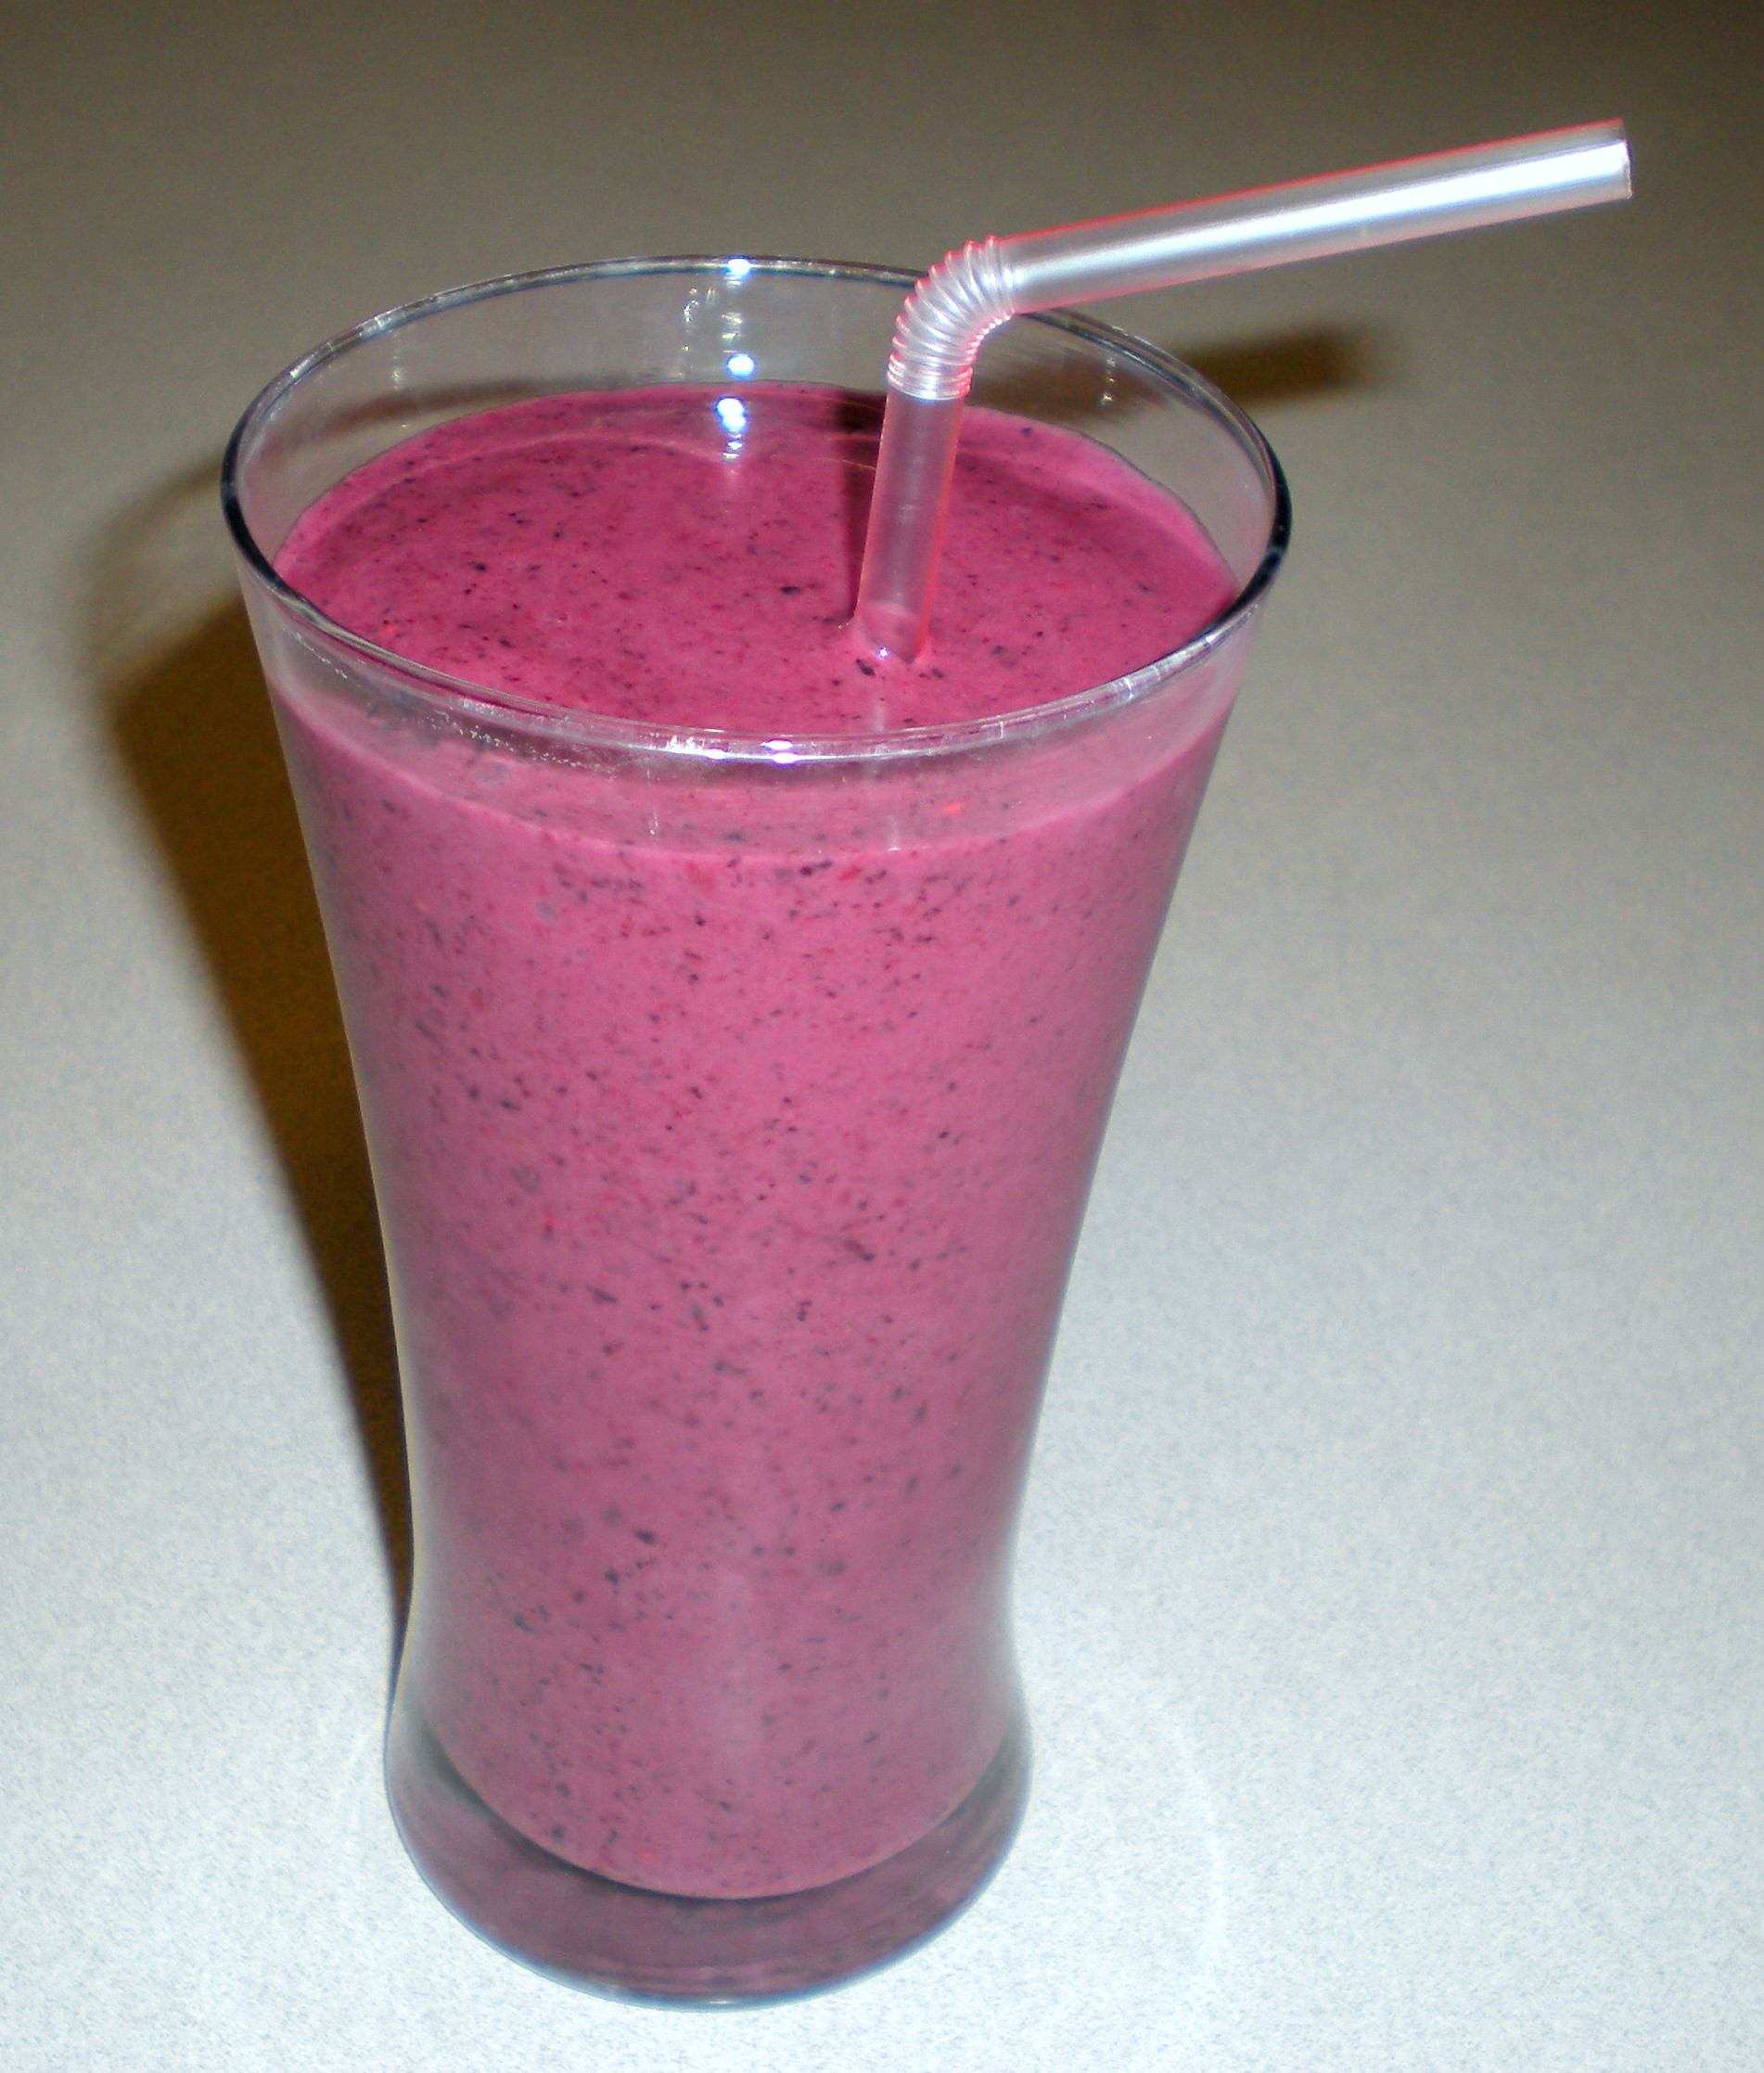 Homemade Fruit Smoothies Healthy
 Healthy Frozen Yogurt Fruit Smoothie